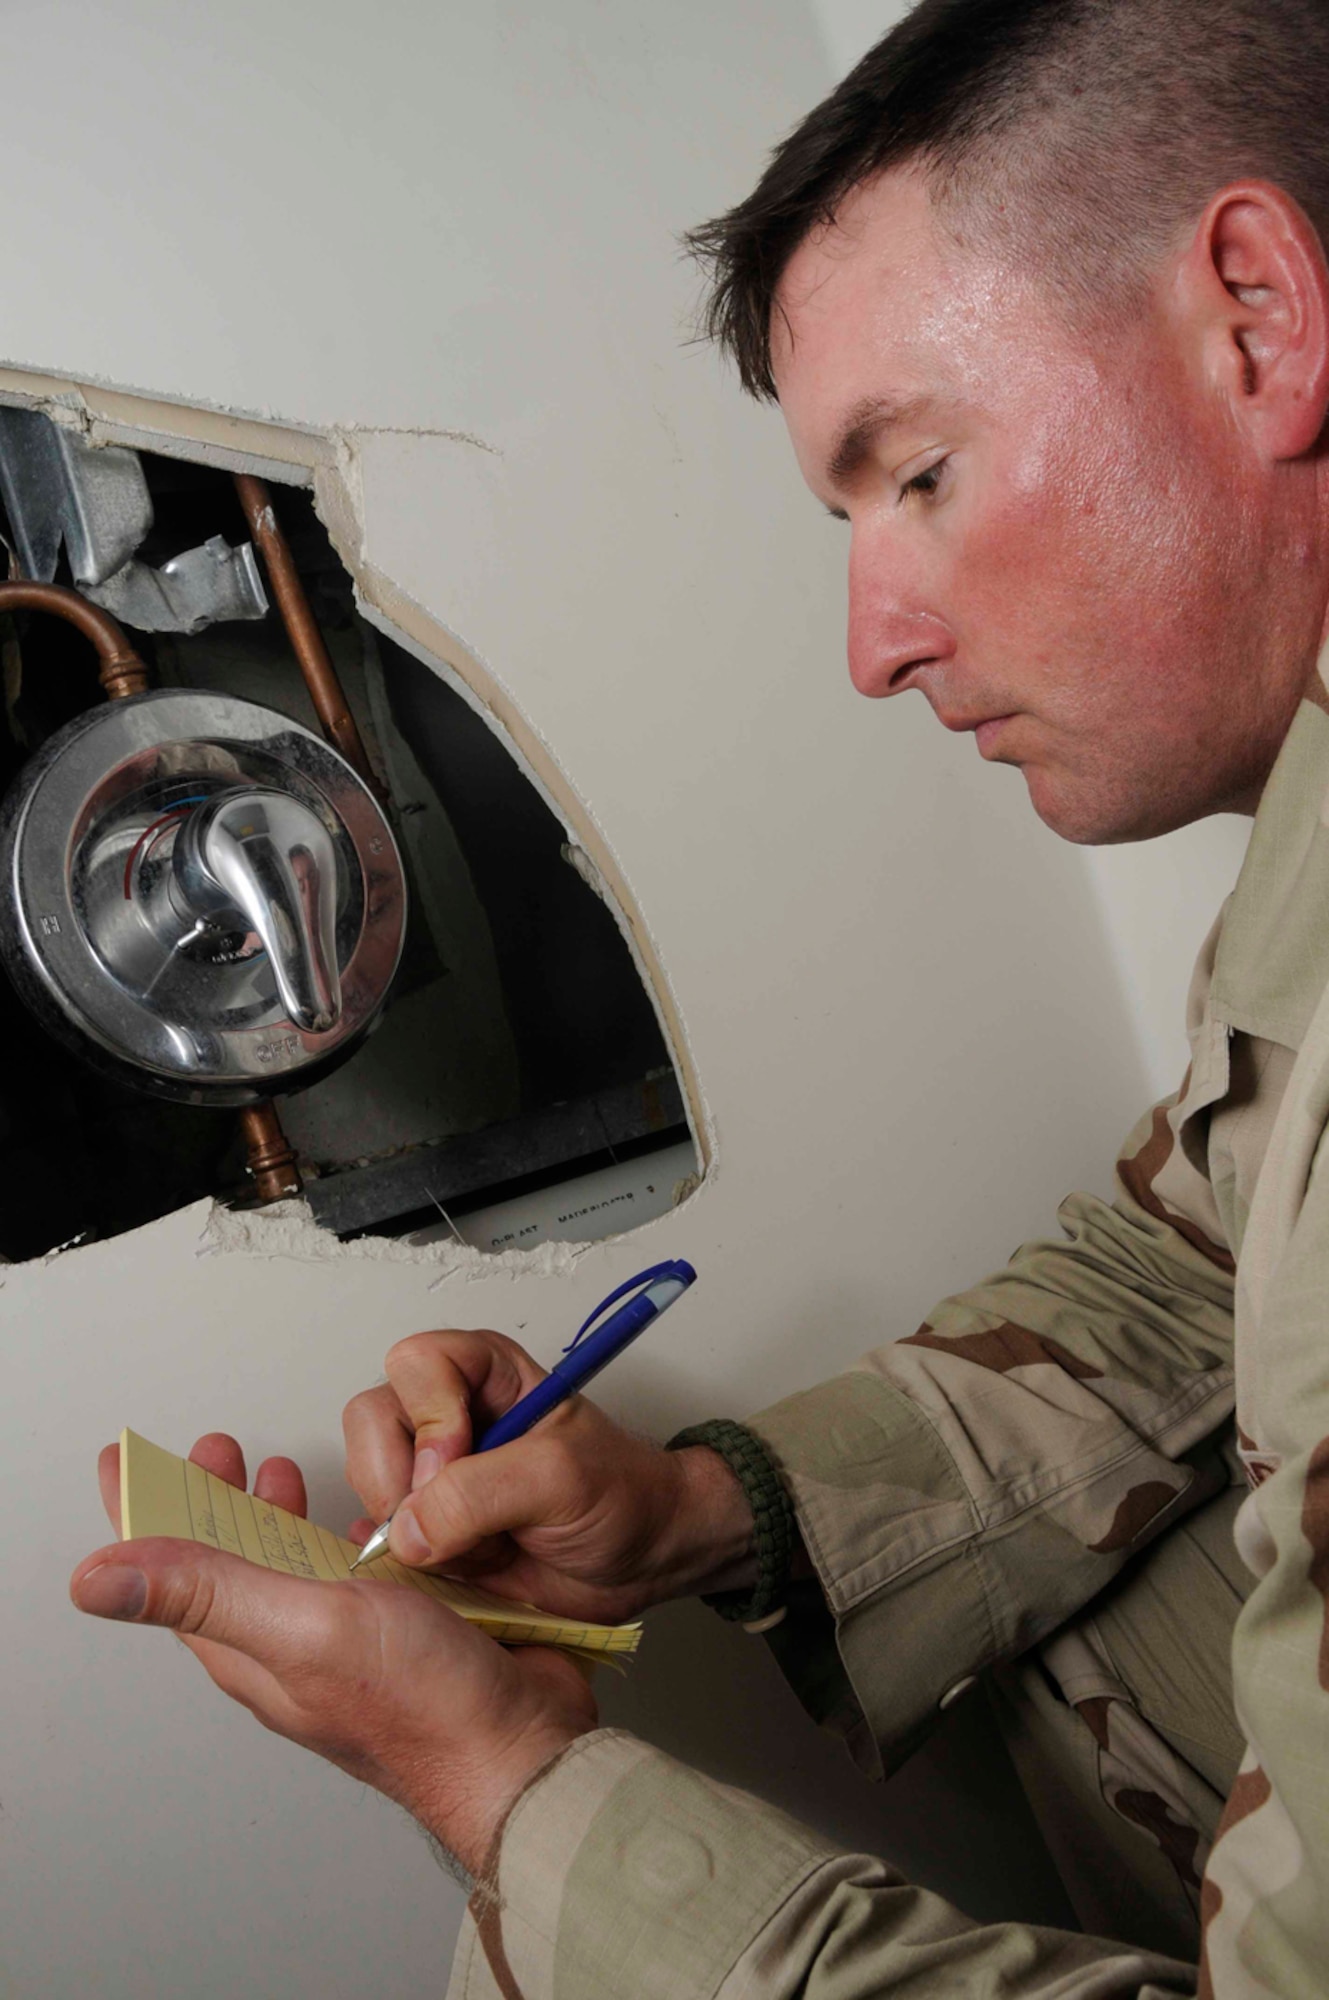 Staff Sgt. James Thomas, 379th Expeditionary Civil Engineer Squadron, writes the specifications of a shower mixing valve for a sheet metal replacement in a cadillac July 30 in Southwest Asia. Cadillacs are bathroom facilities for deployed military members and its Sergeant Thomas’ job to perform daily maintenance on it. Sergeant Thomas is a utility craftsman deployed from Charleston Air Force Base, S.C. (U.S. Photo/Staff Sgt. Darnell T. Cannady)